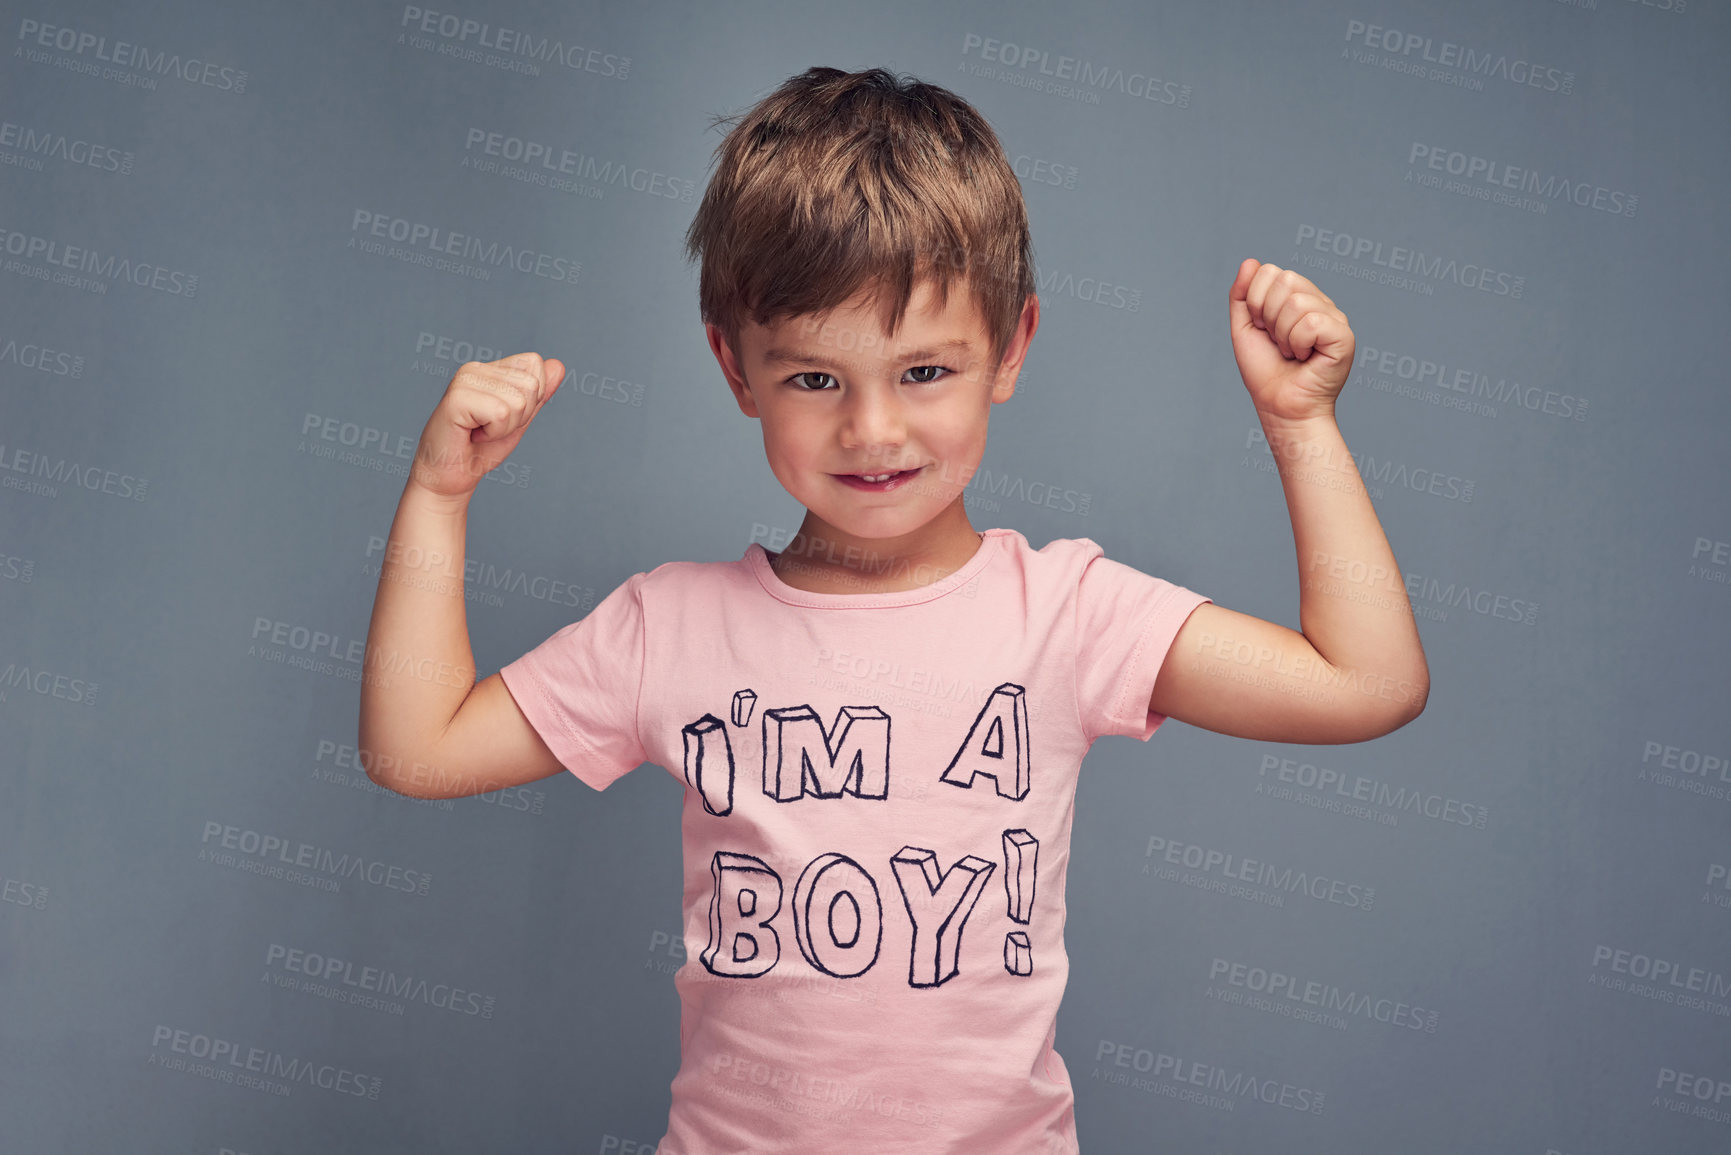 Buy stock photo Studio portrait of a cheering boy wearing a shirt with “I’m a boy” printed on it against a gray background